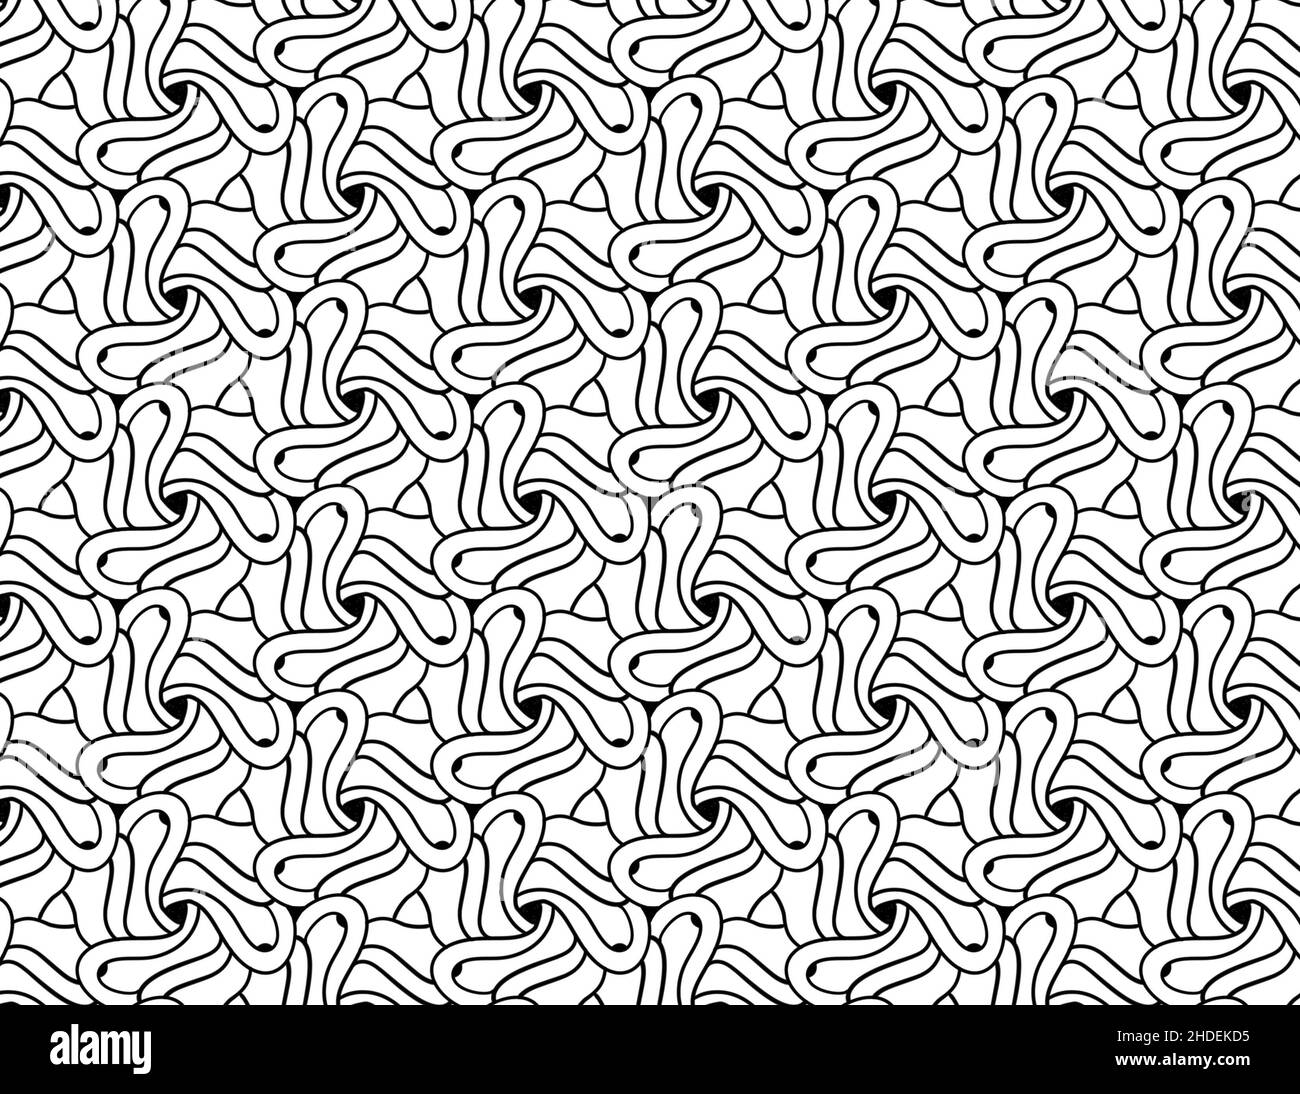 Abstract coloring page pattern for adults. Meditative art to color for stress relief and relaxing. Triangle inspired fun idea for coloring book. Hand Stock Photo